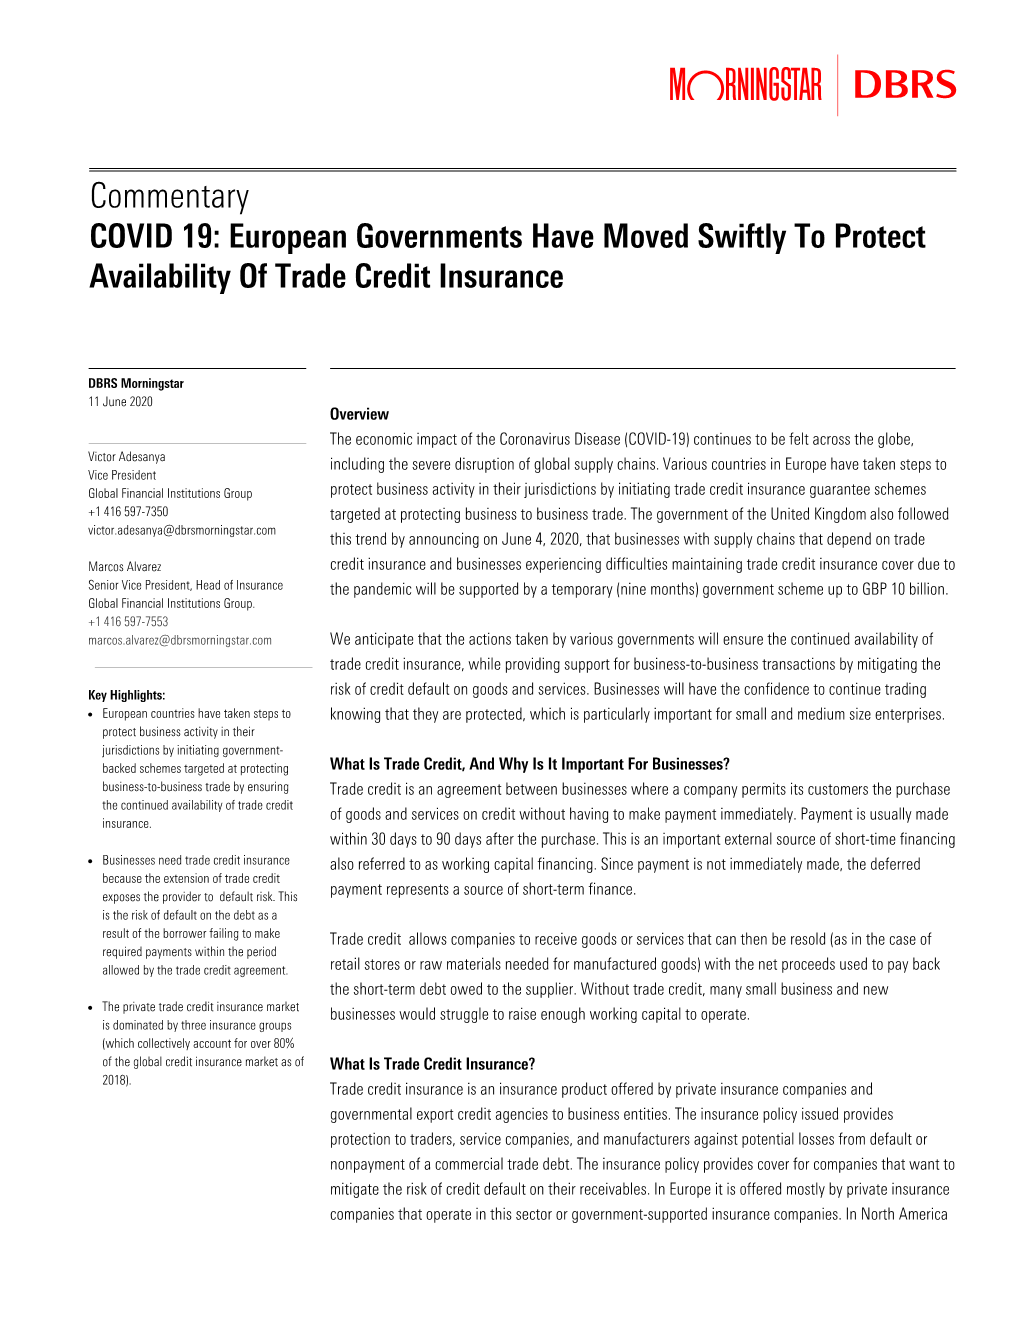 Commentary COVID 19: European Governments Have Moved Swiftly to Protect Availability of Trade Credit Insurance